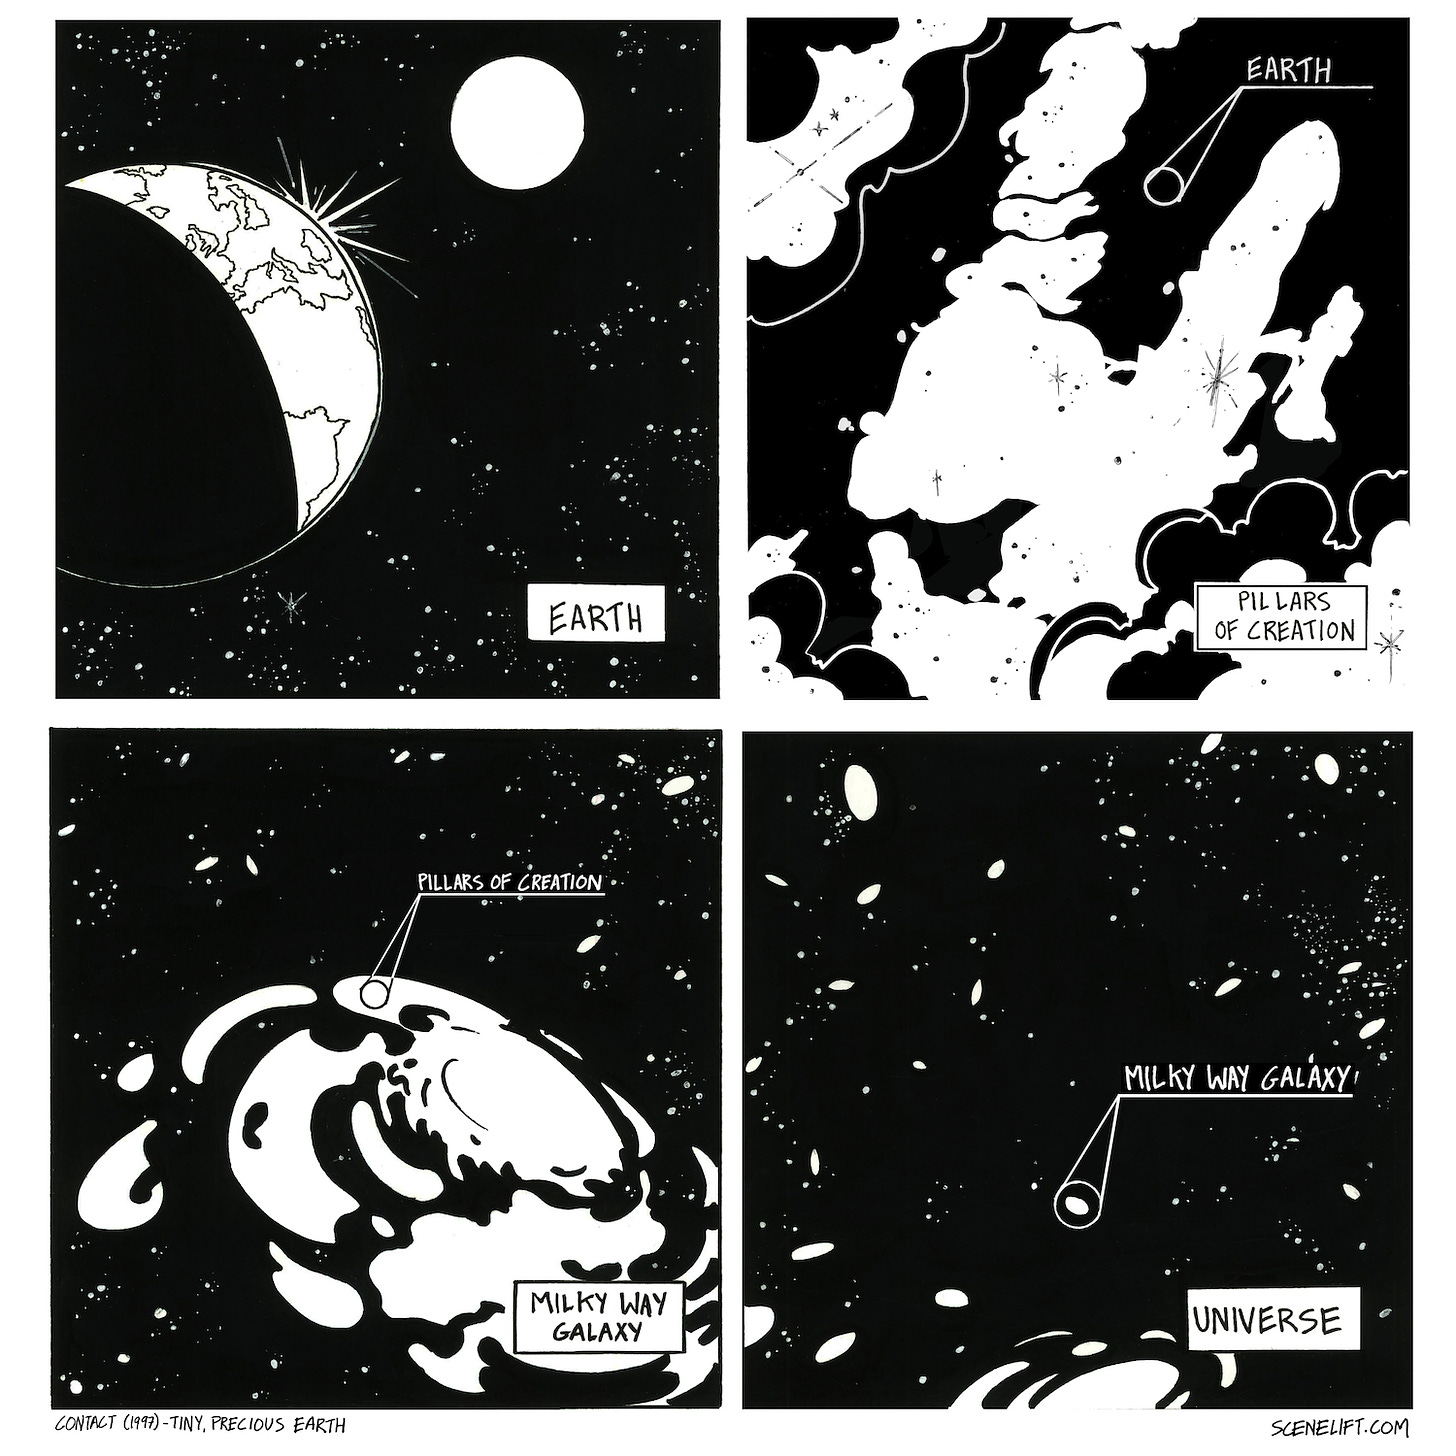 Fan art comic of the opening scene of the movie Contact, showing earth, then zooming out to the Pillars of Creation, then zooming out to the Milky Way Galaxy, then zooming out to the Universe